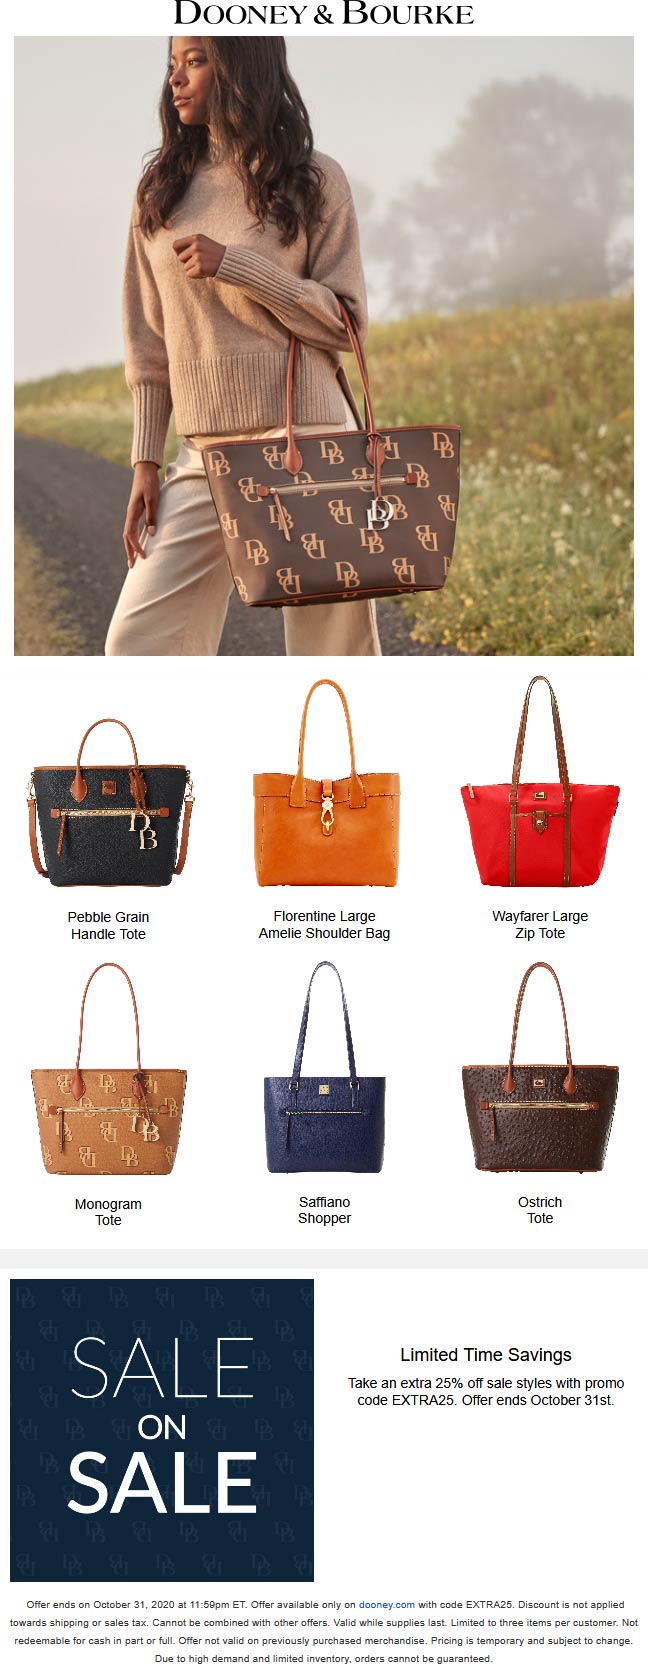 Dooney & Bourke stores Coupon  Extra 25% off sale items at Dooney & Bourke via promo code EXTRA25 #dooneybourke 